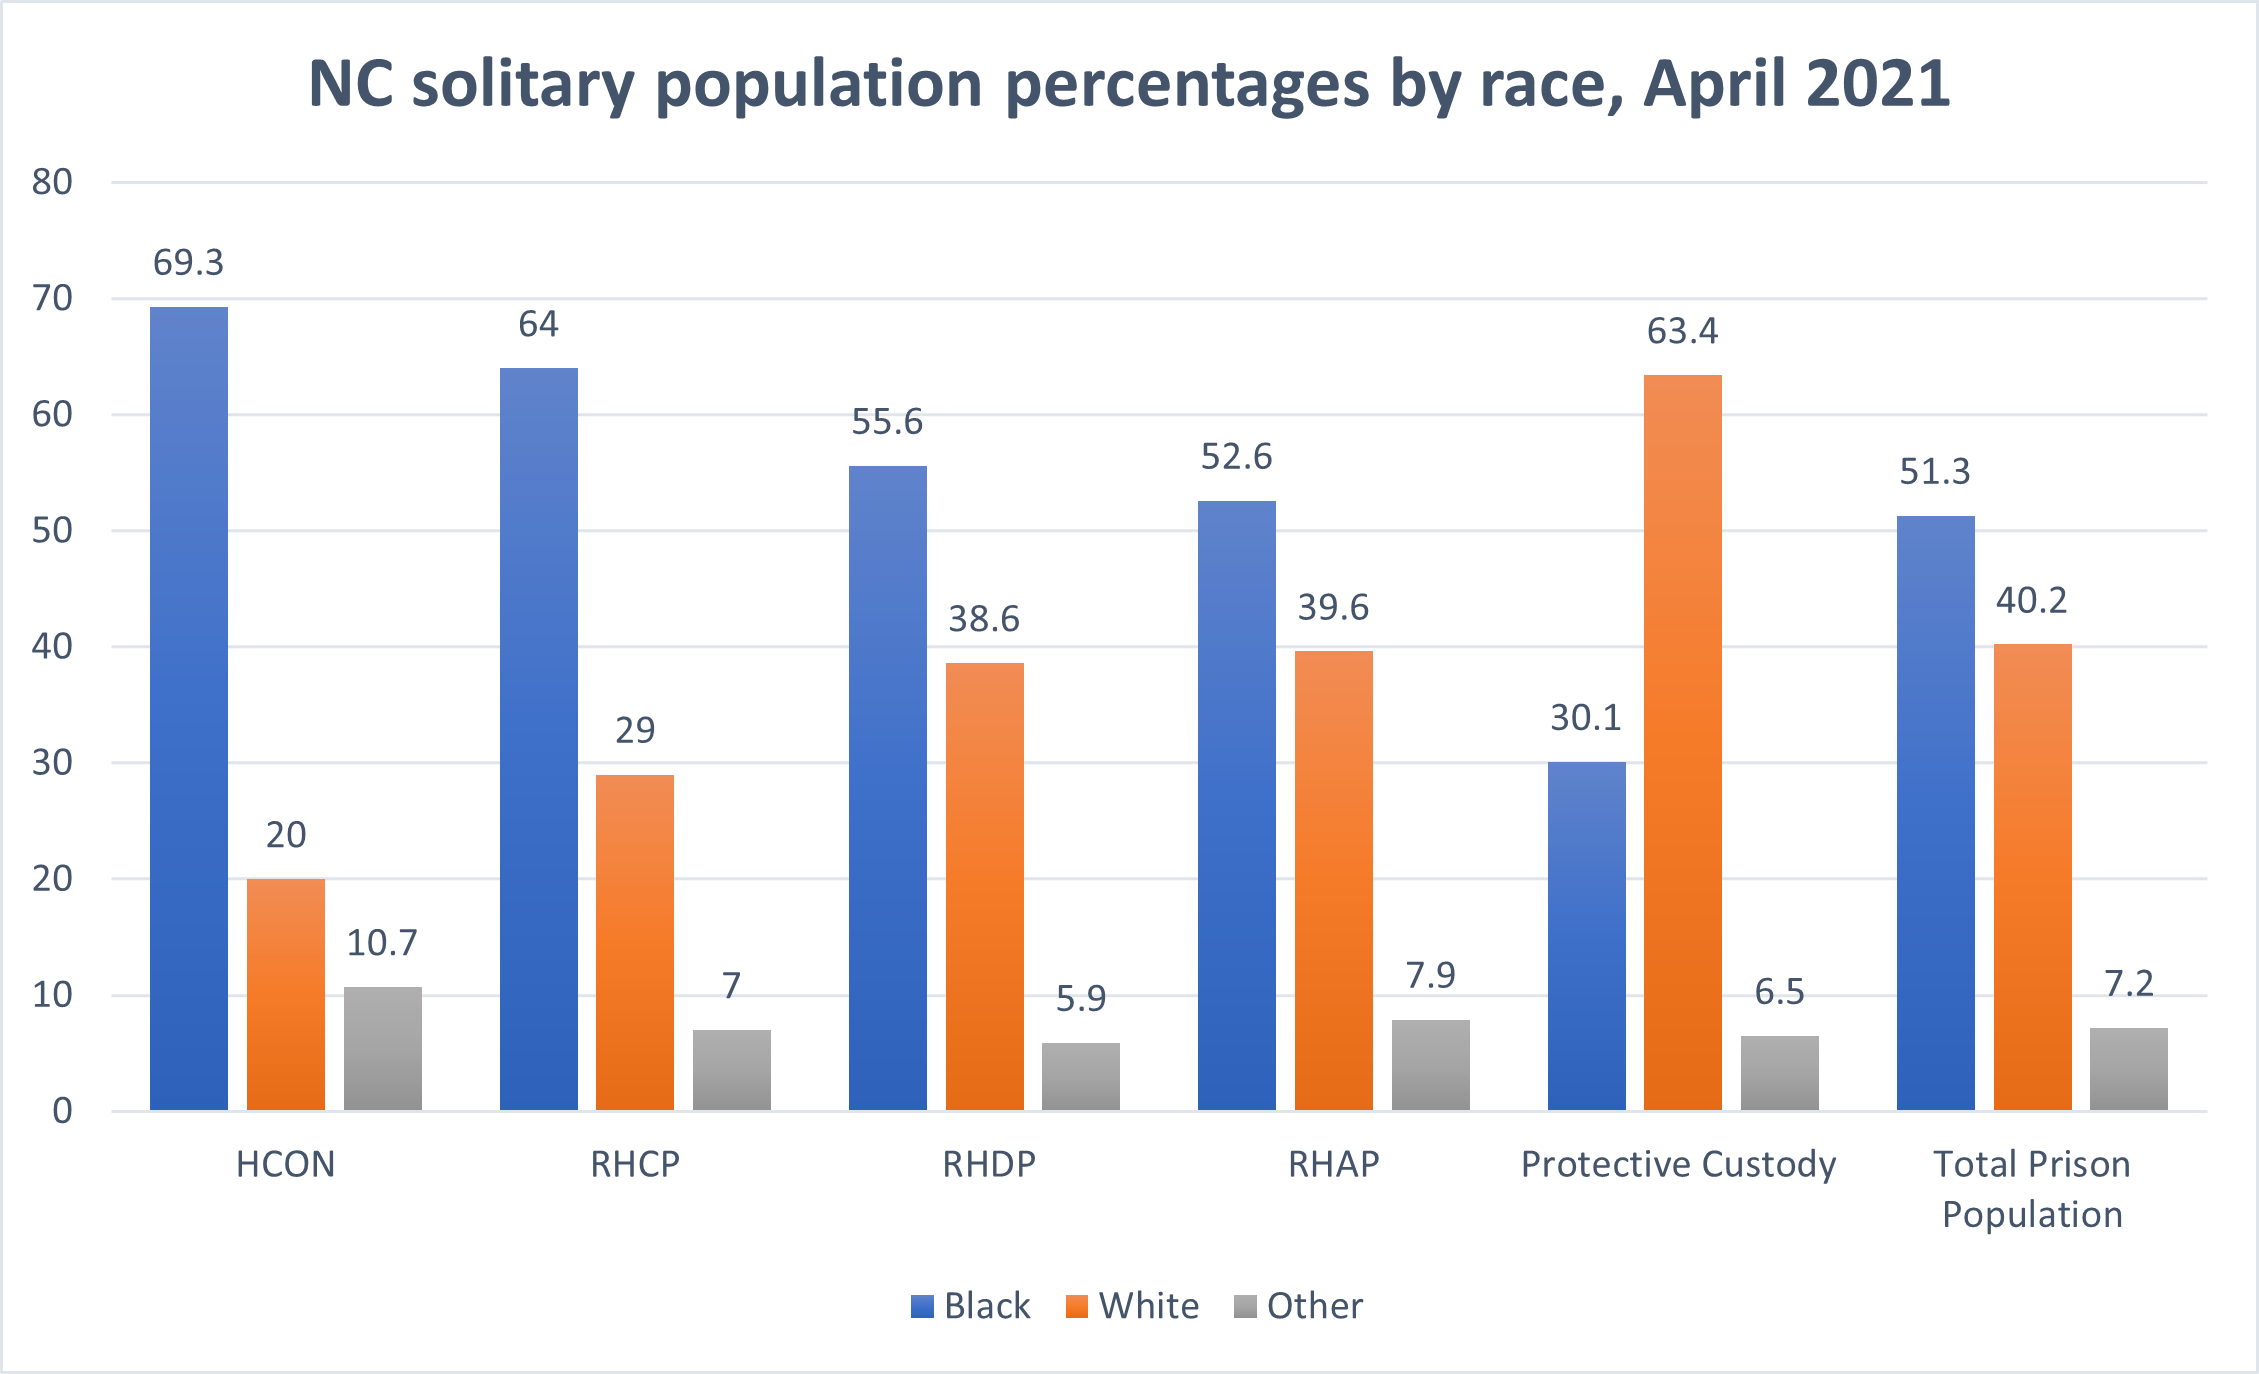 NC solitary population percentages by race, April 2021. HCON (most restrictive setting) 69.3 % Black, 20% white, 10.7 percent other; RHCP 64% Black, 29% white, 7% other; RHDP 55.6% Black, 38.9% white, 7.9% other, Protective custody 30.1% Black, 63.4% white, 6.5% other; Total prison population, 51.3% Black, 40.2 % white, 7.2% other. Data represented by column chart. 